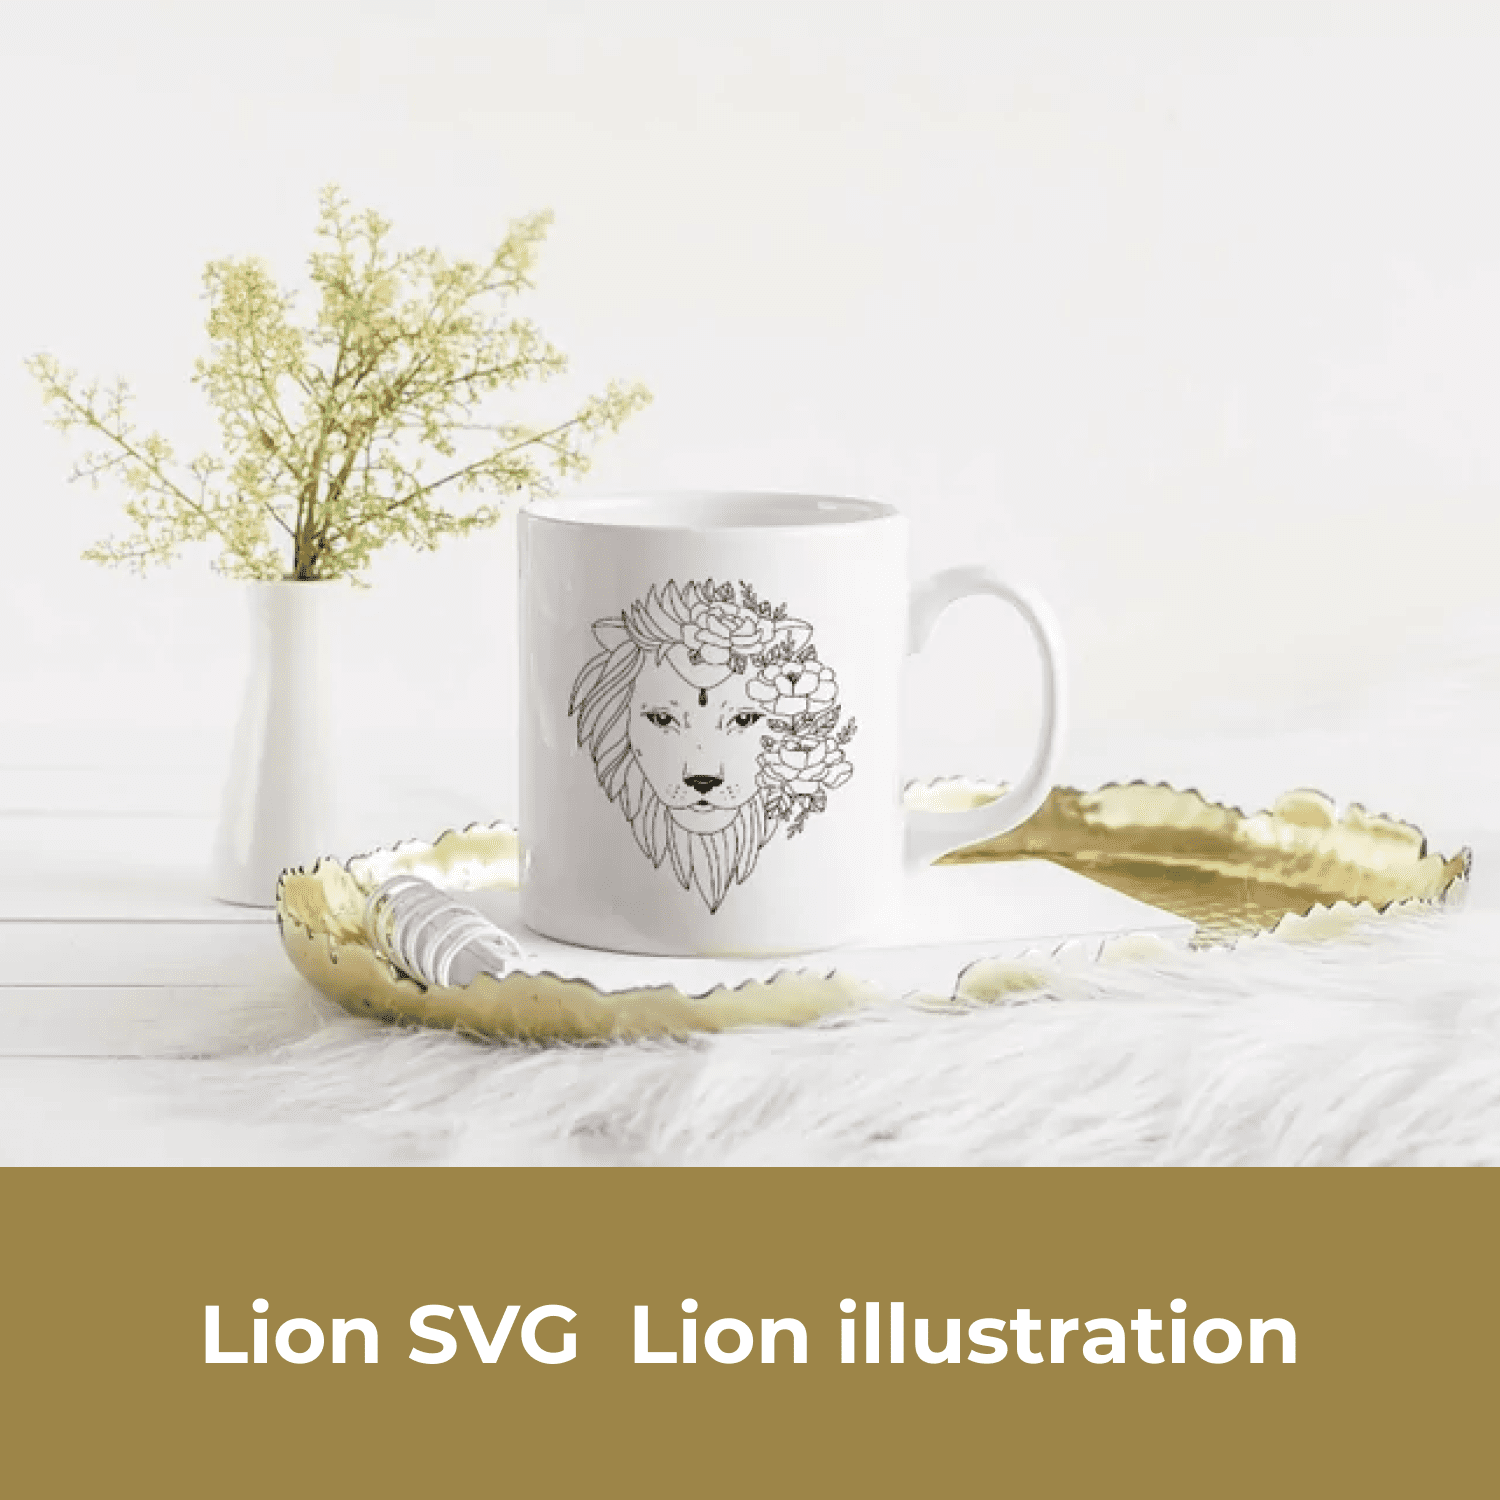 Lion mug sitting on top of a white table.